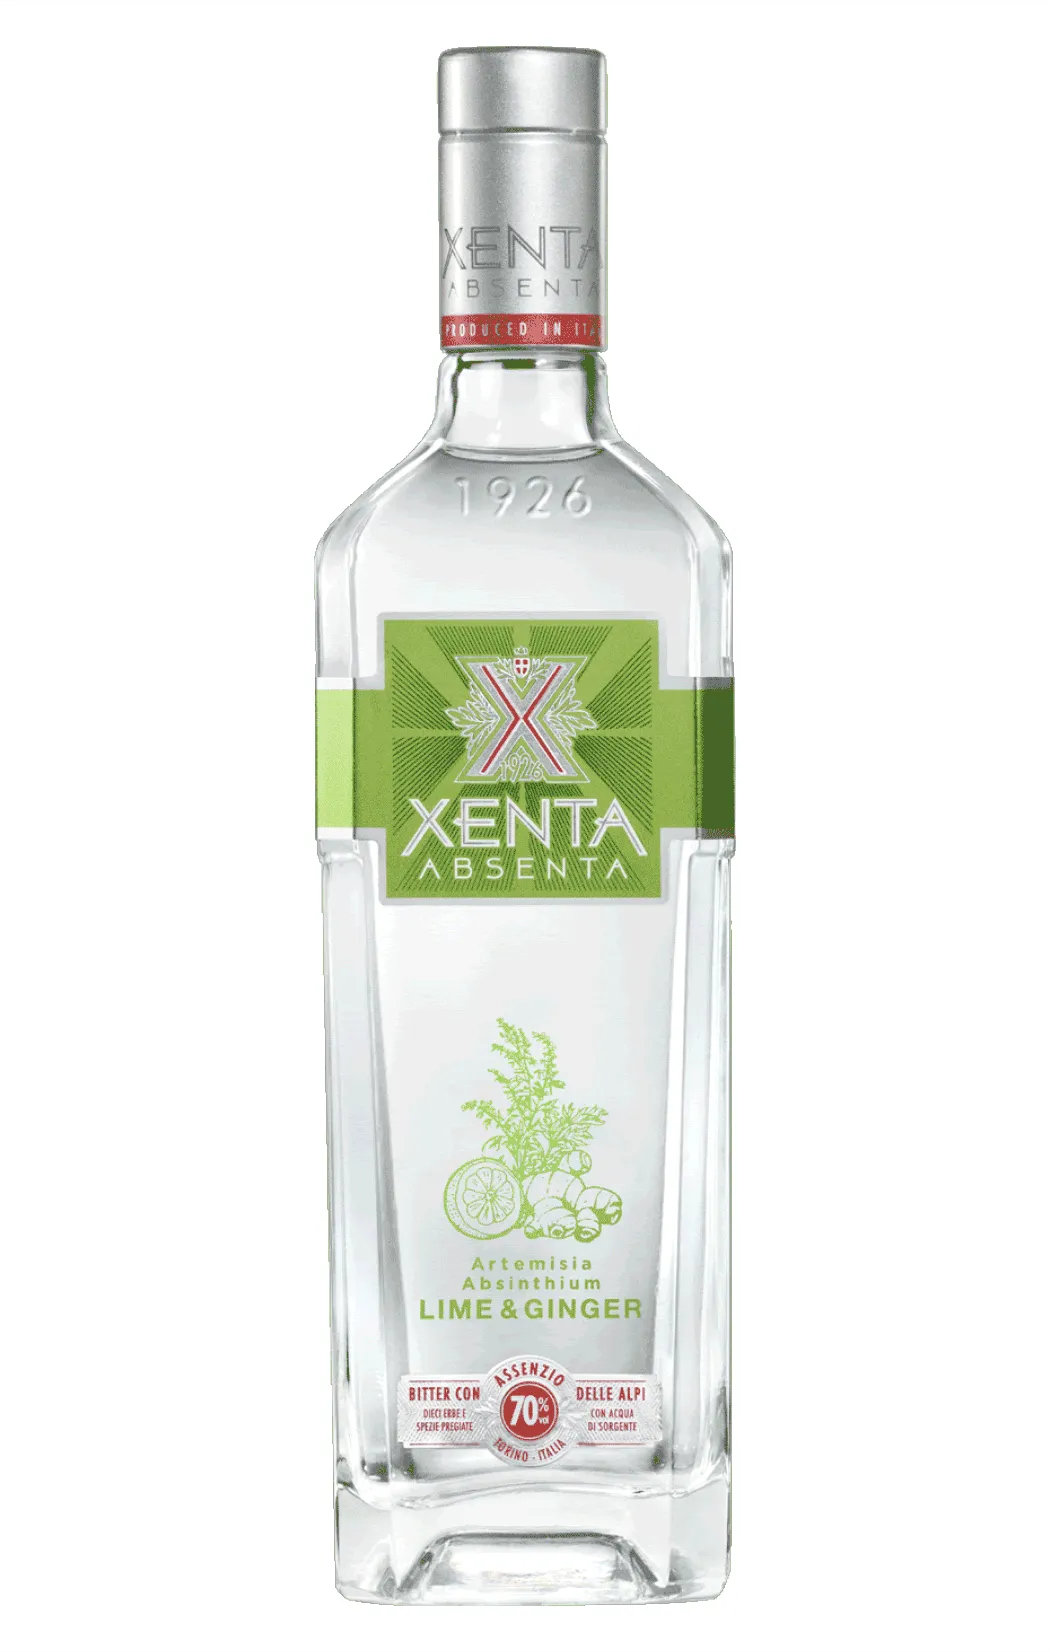 Xenta Absenta Lime Ginger